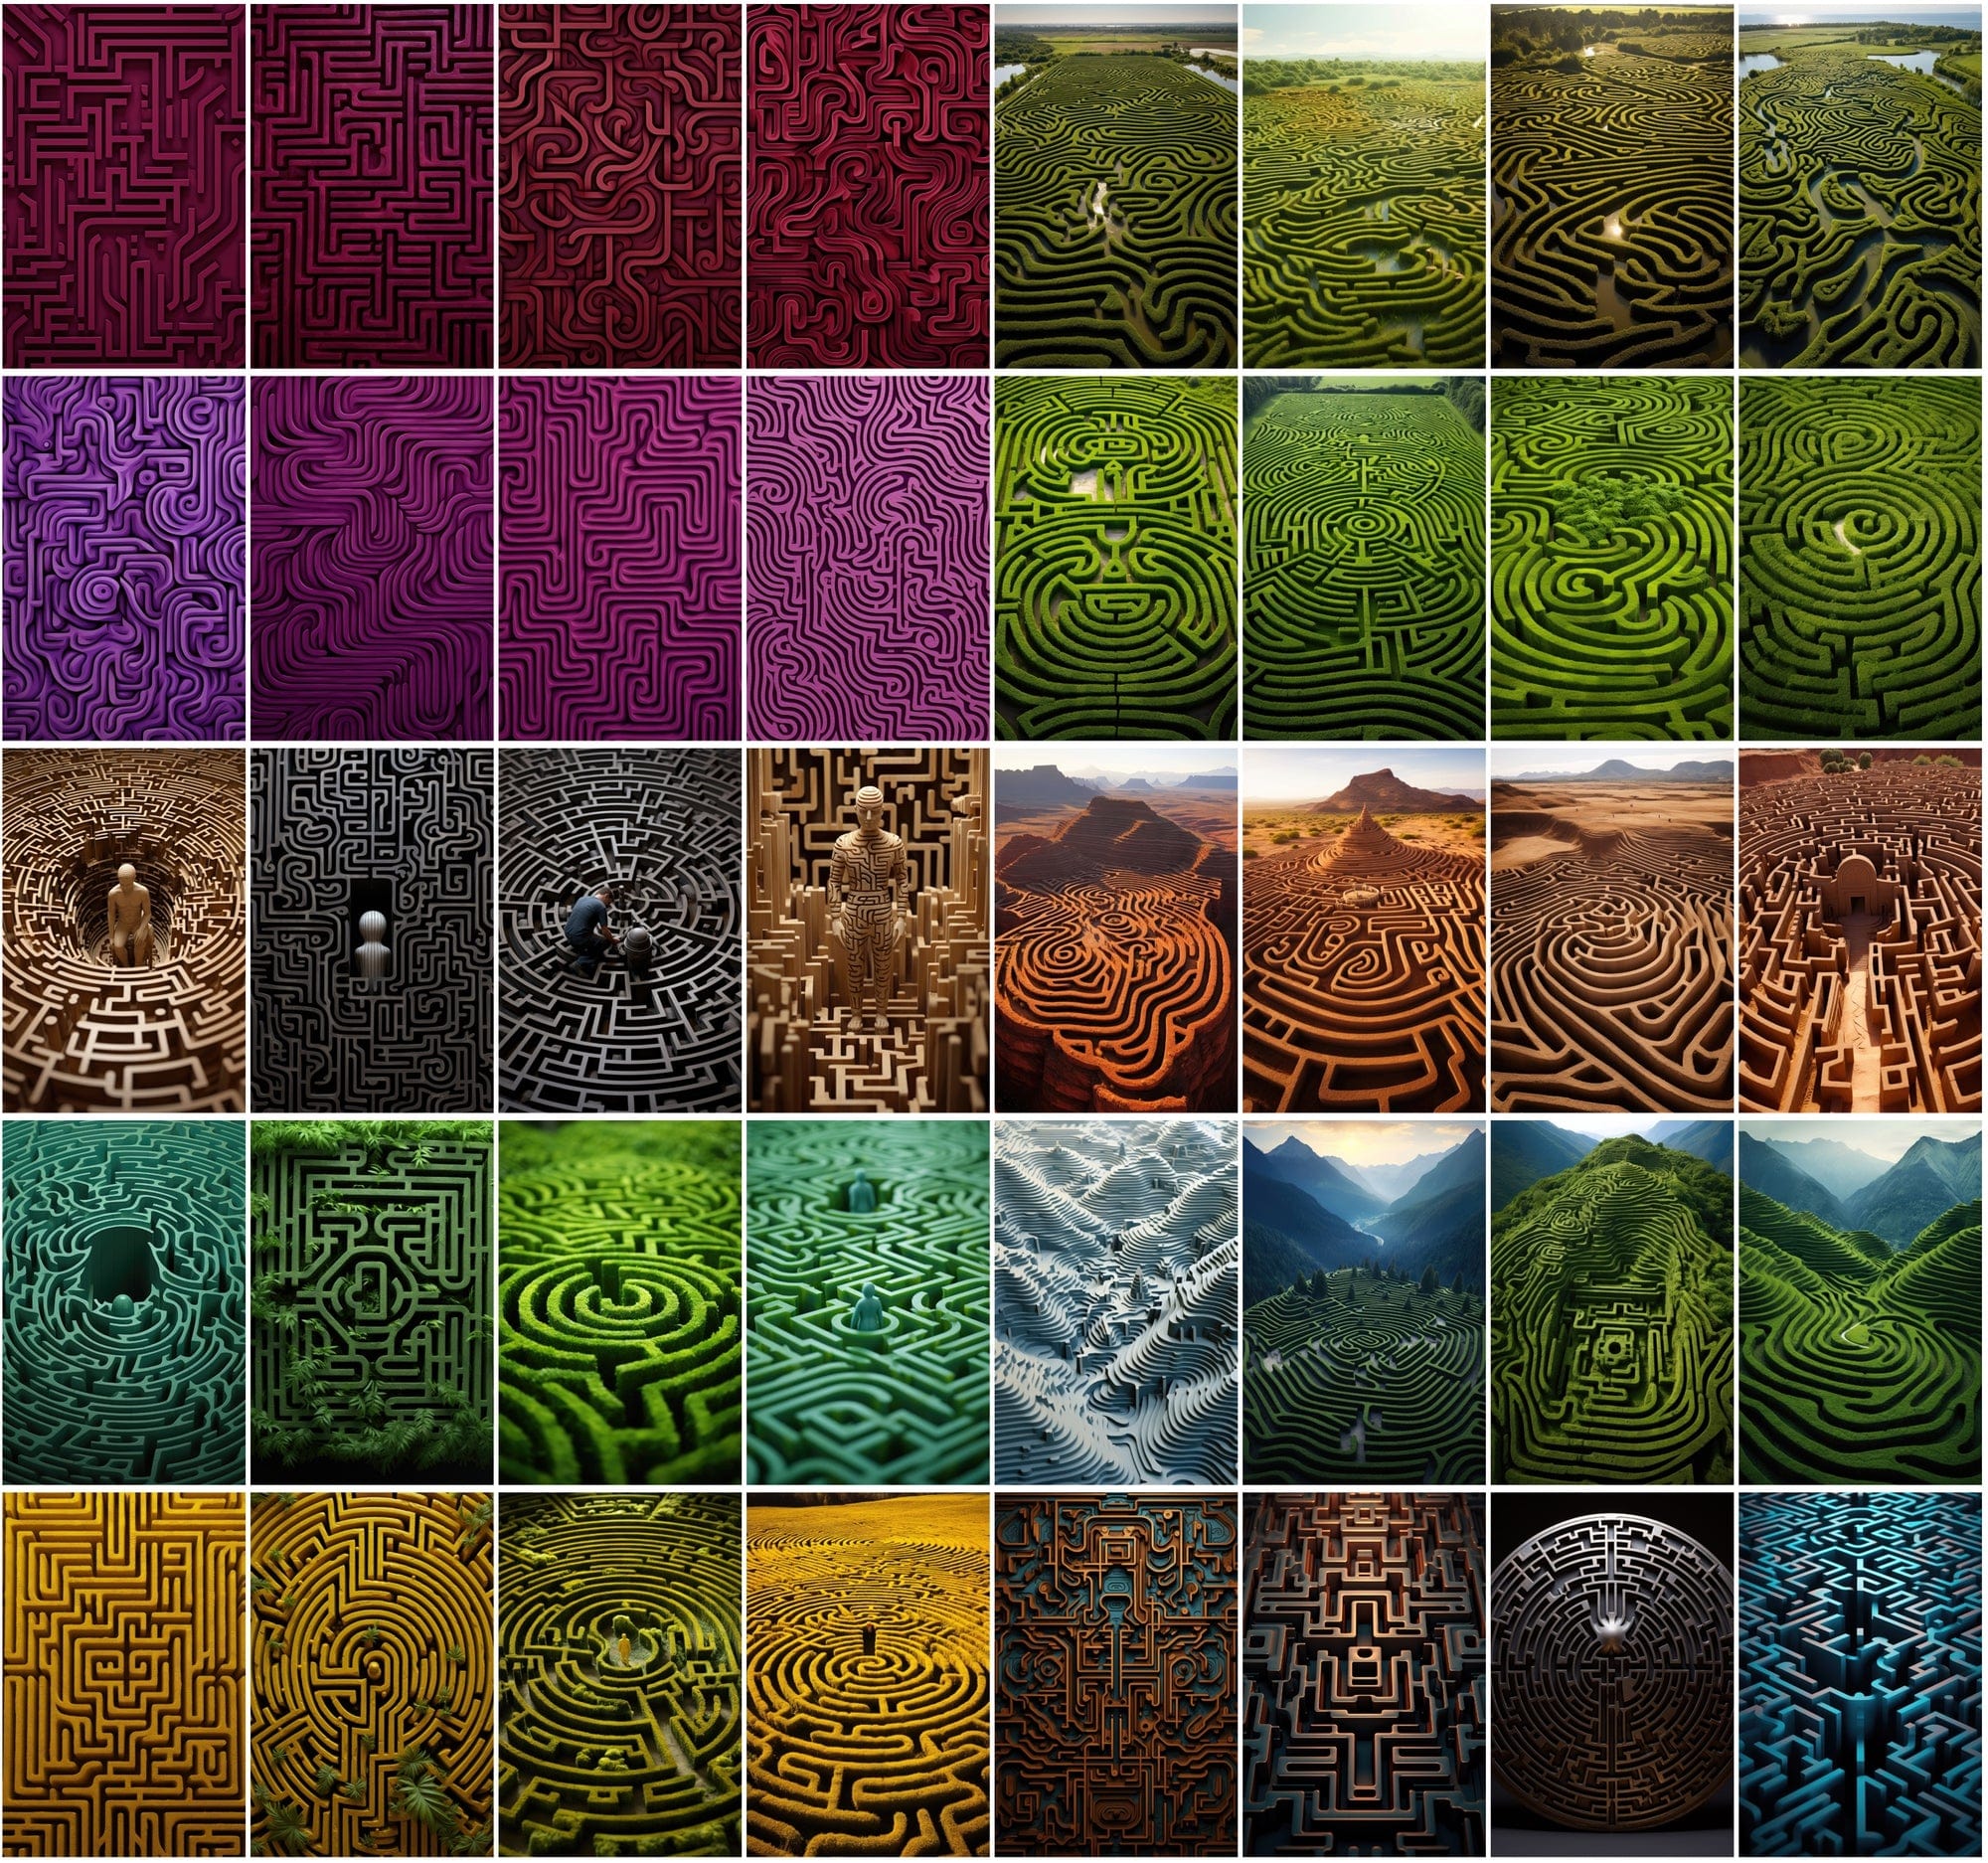 650 Colorful Maze Patterns, High-Resolution JPGs with Commercial License Digital Download Sumobundle